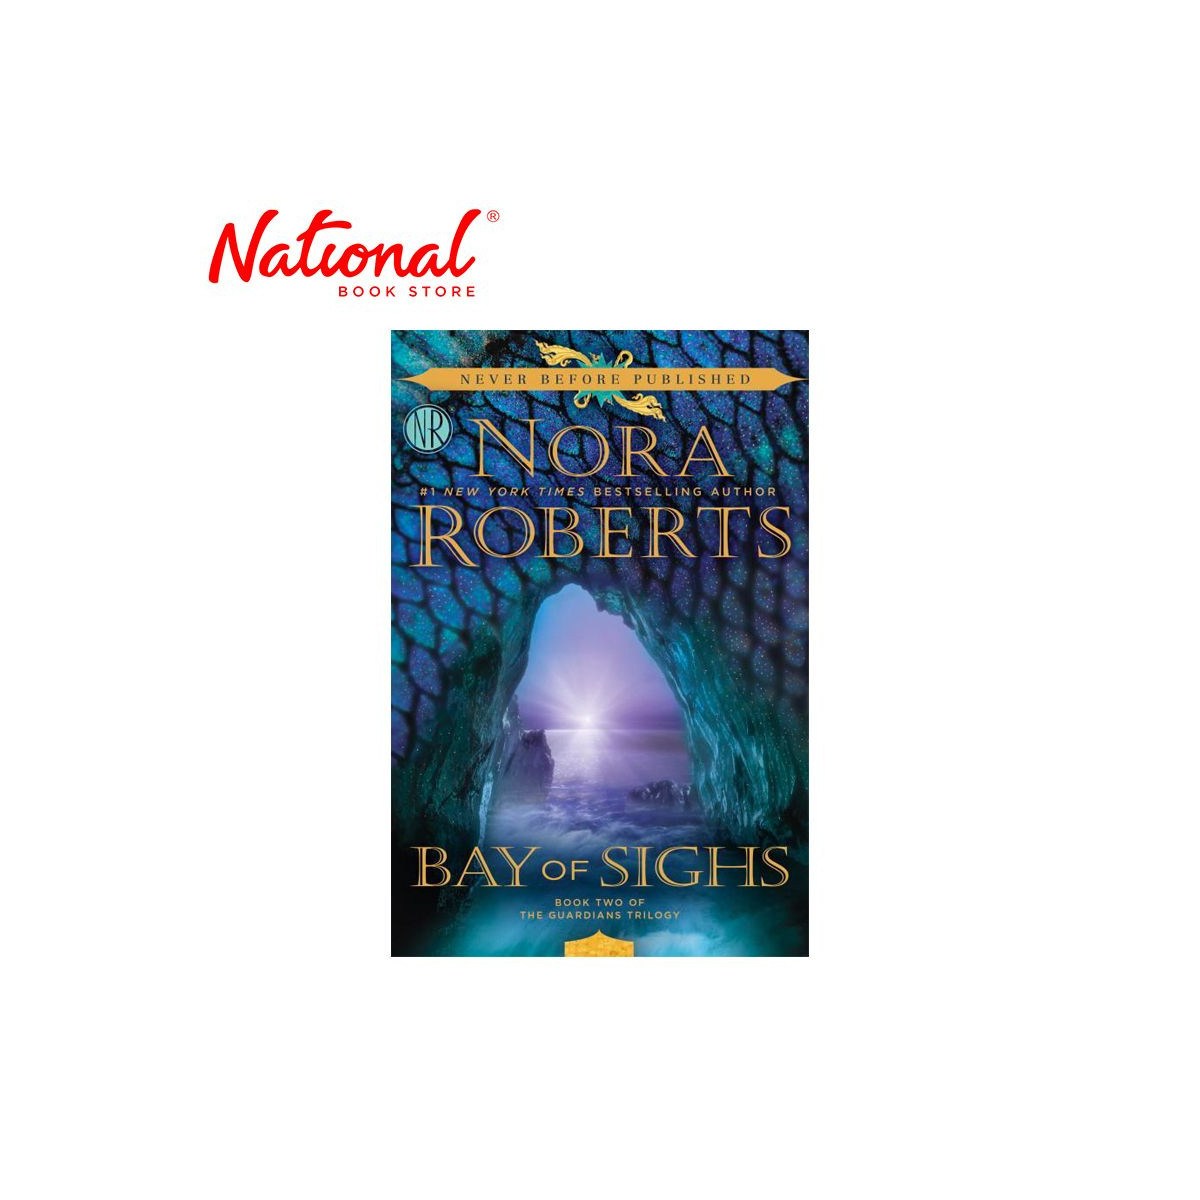 Bay of Sighs: Book Two of the Guardians Trilogy Trade Paperback by Nora Roberts - Romance